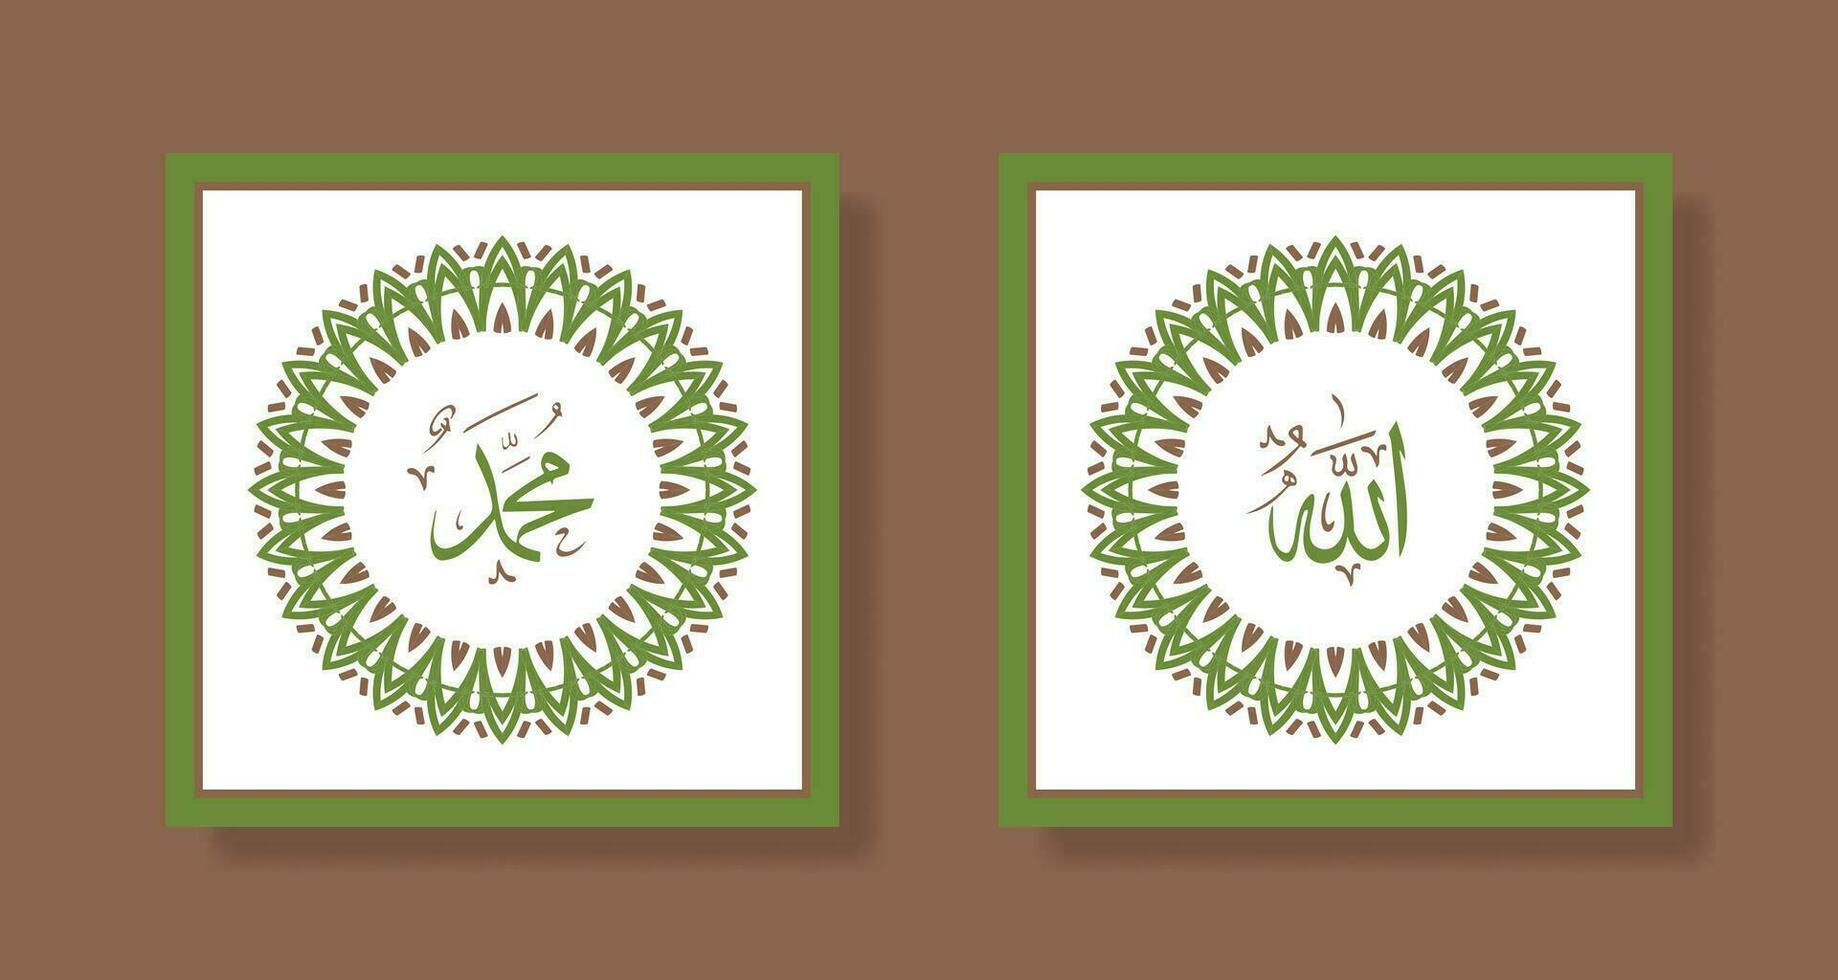 Translate this text from Arabic language to in English is Muhammad and Allah, so it means God in muslim. Set two of islamic wall art. Allah and Muhammad wall decor. Minimalist Muslim wallpaper. vector